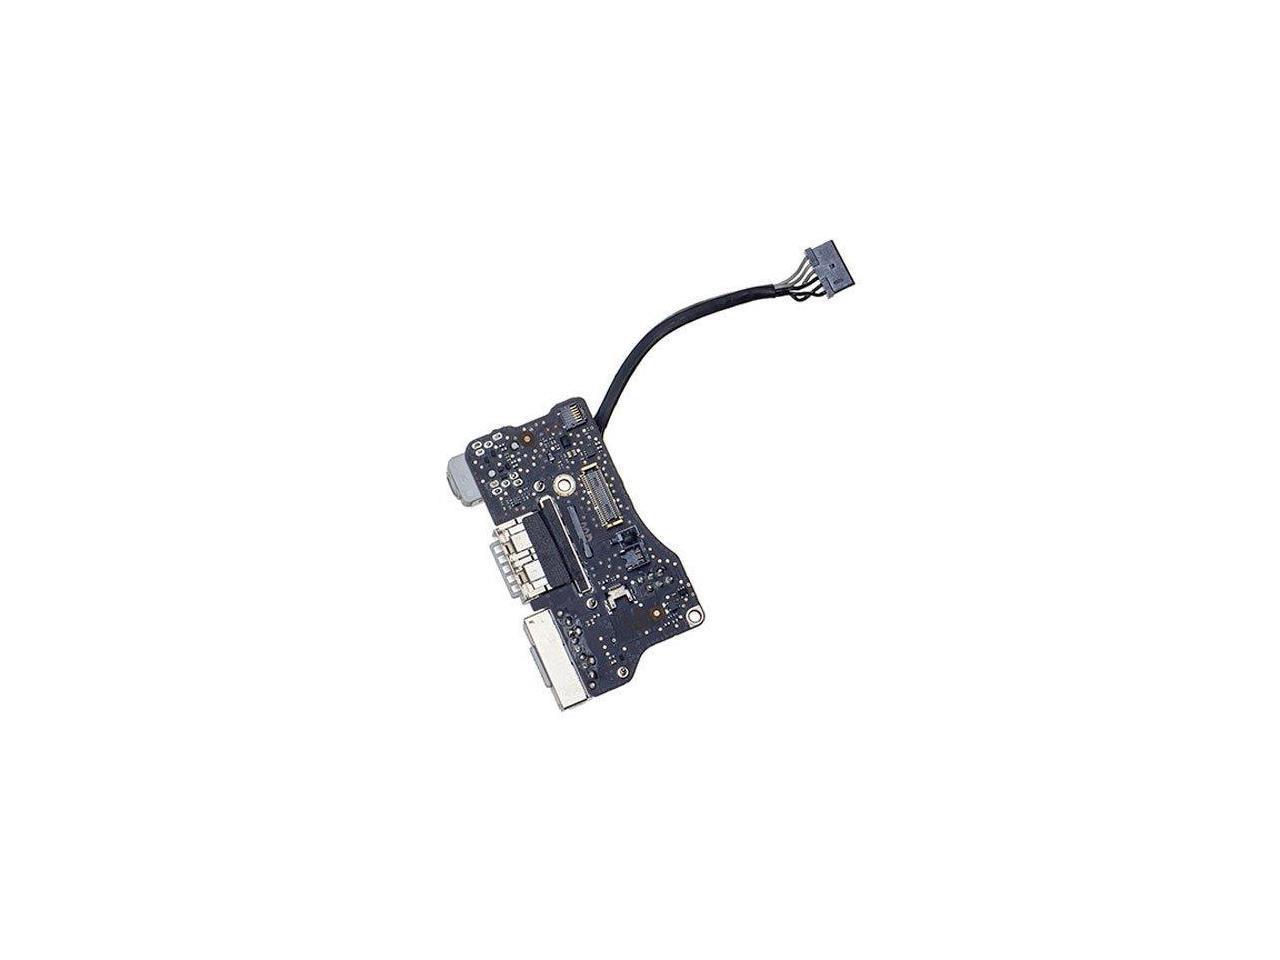 Cable Length: Standard, Color: 3 Pieces ShineBear Laptop I/O Board USB Power Audio Board for MacBook Air 13 A1466 MD231 MD232 Mid 2012 820-3214-A 923-0125